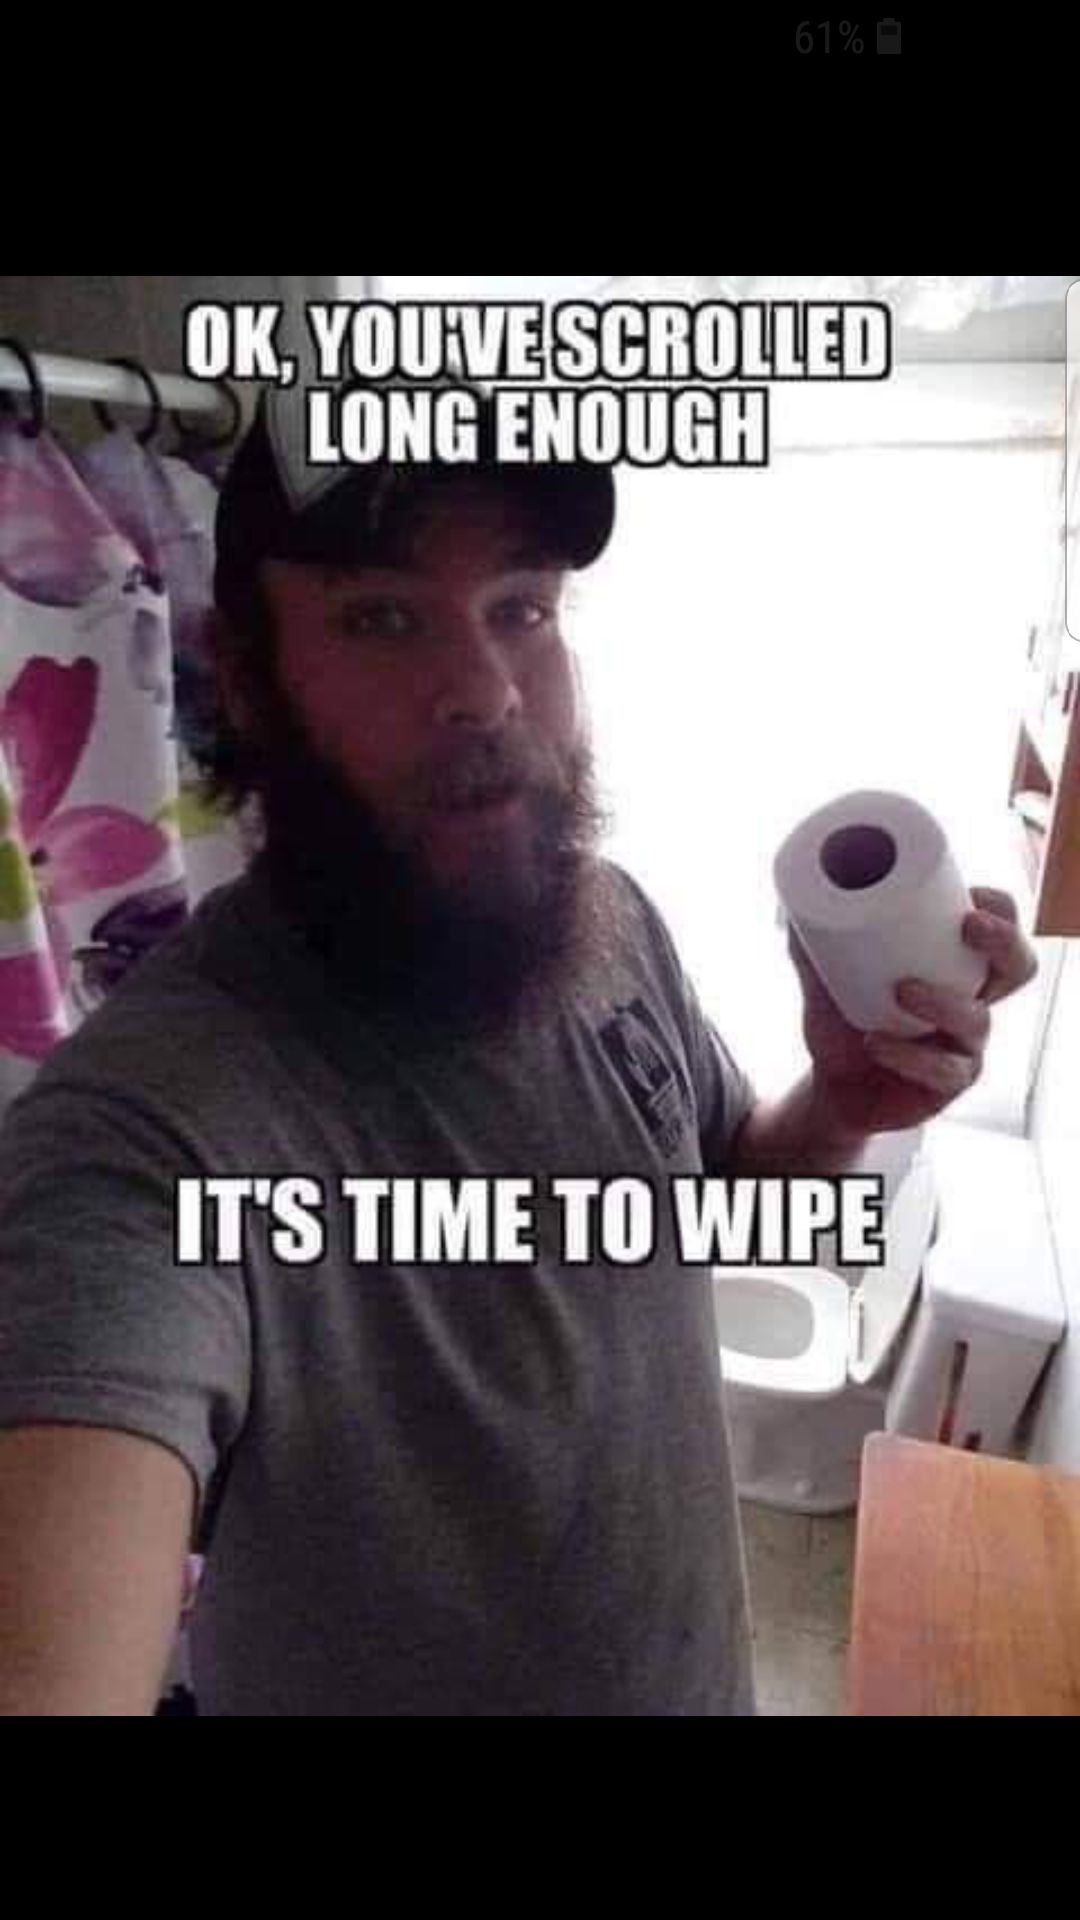 Time to wipe!